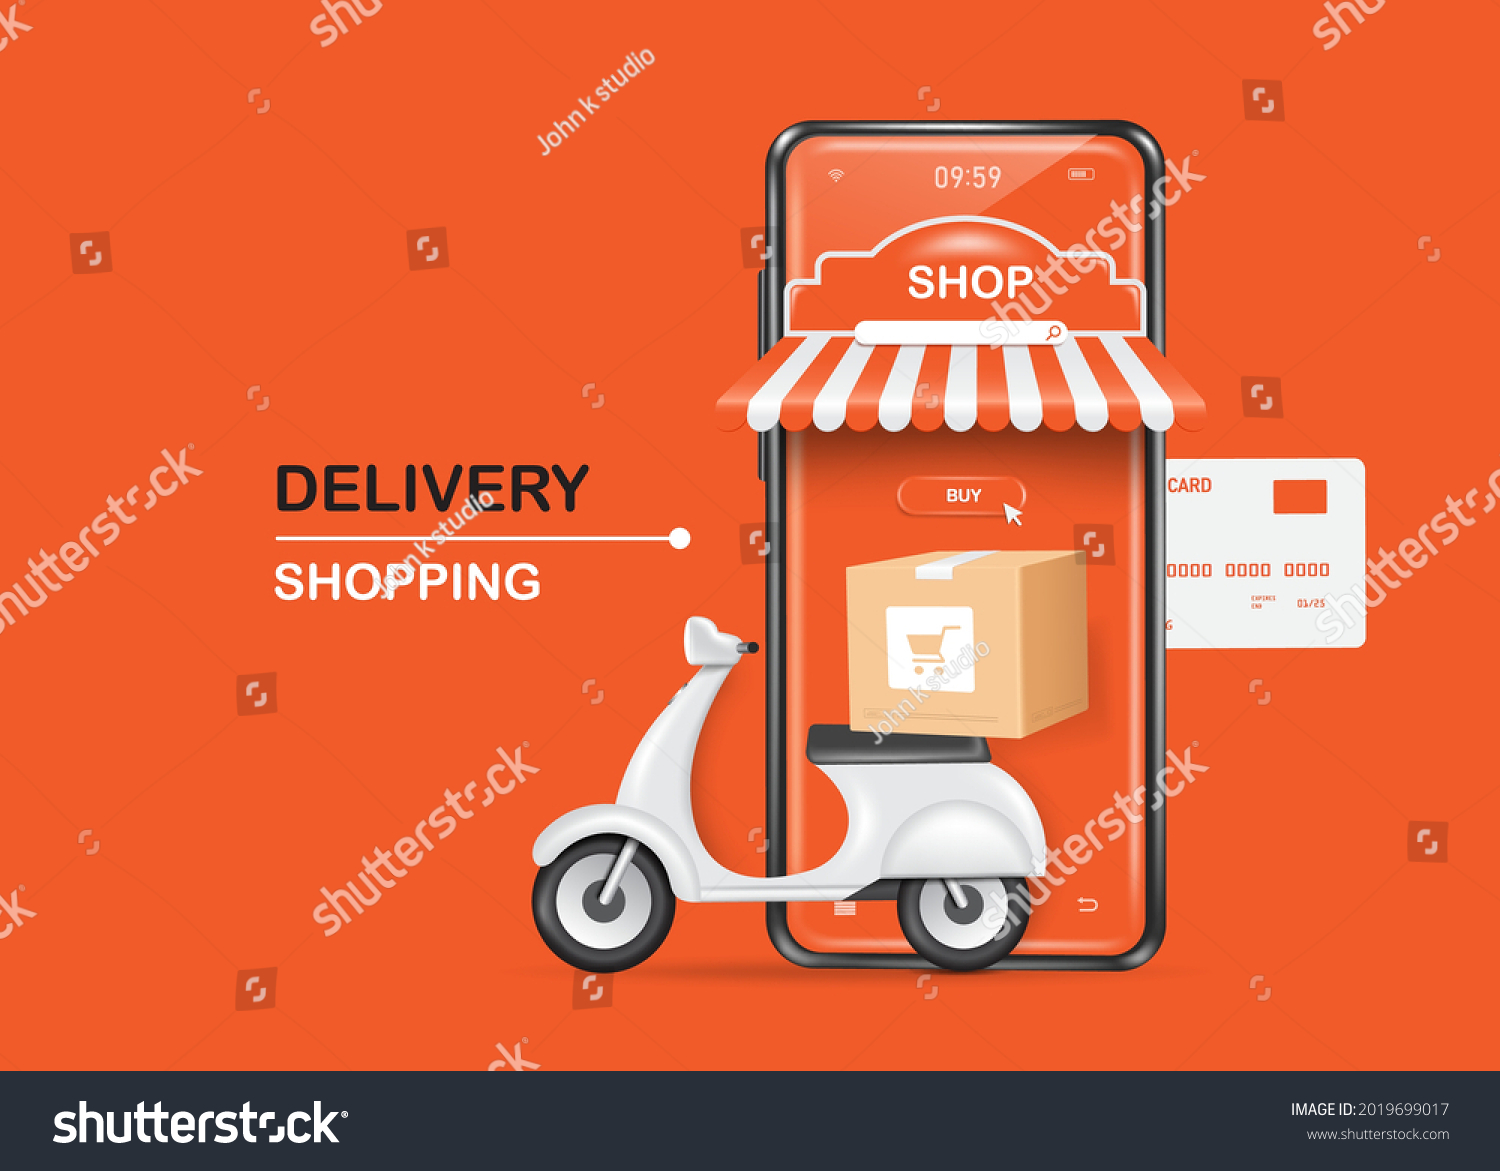 SVG of Scooters or motorcycles for parcel delivery Park in front of the smartphone shop and a parcel box was placed on it,vector 3d isolated on orange background for delivery and shopping online concept svg